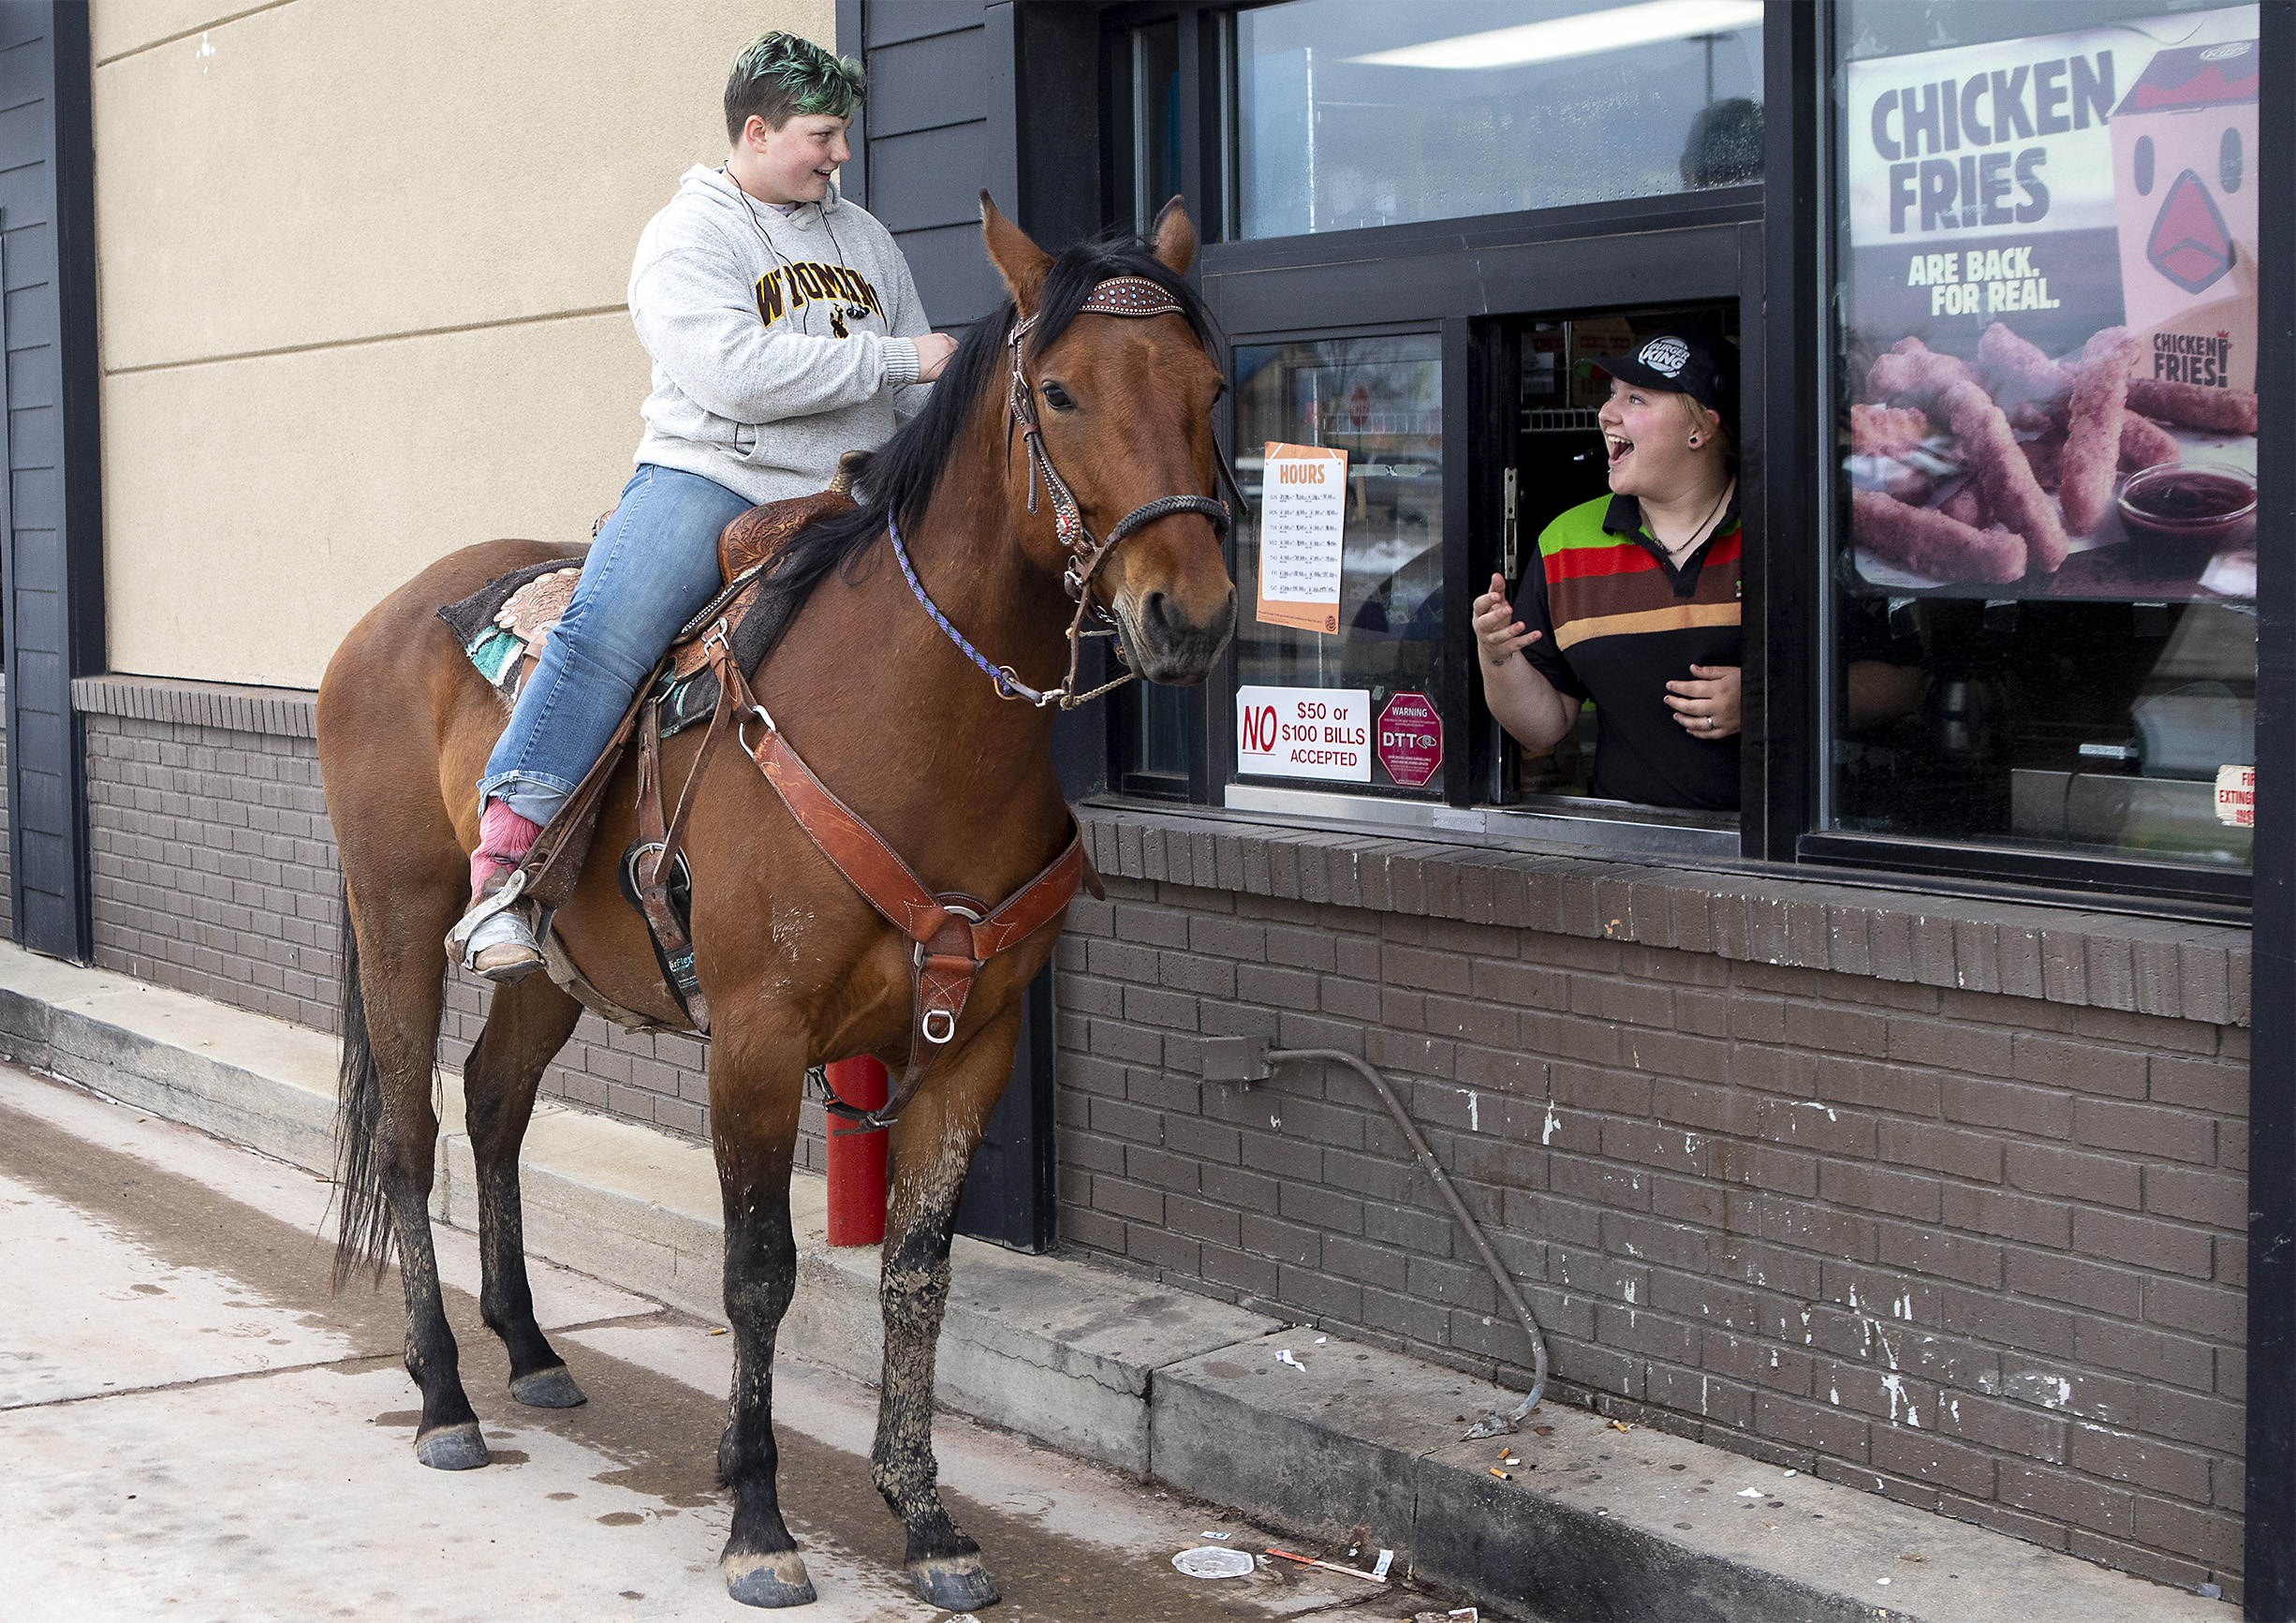  Kristie Laatsch reacts as Dana Blaszkowski, 17, rides her 5-year-old horse Ike up to the Burger King drive-thru window on Thursday afternoon. Blaszkowski decided to take a more rural method of transportation from her home in Rozet to class at Thunde